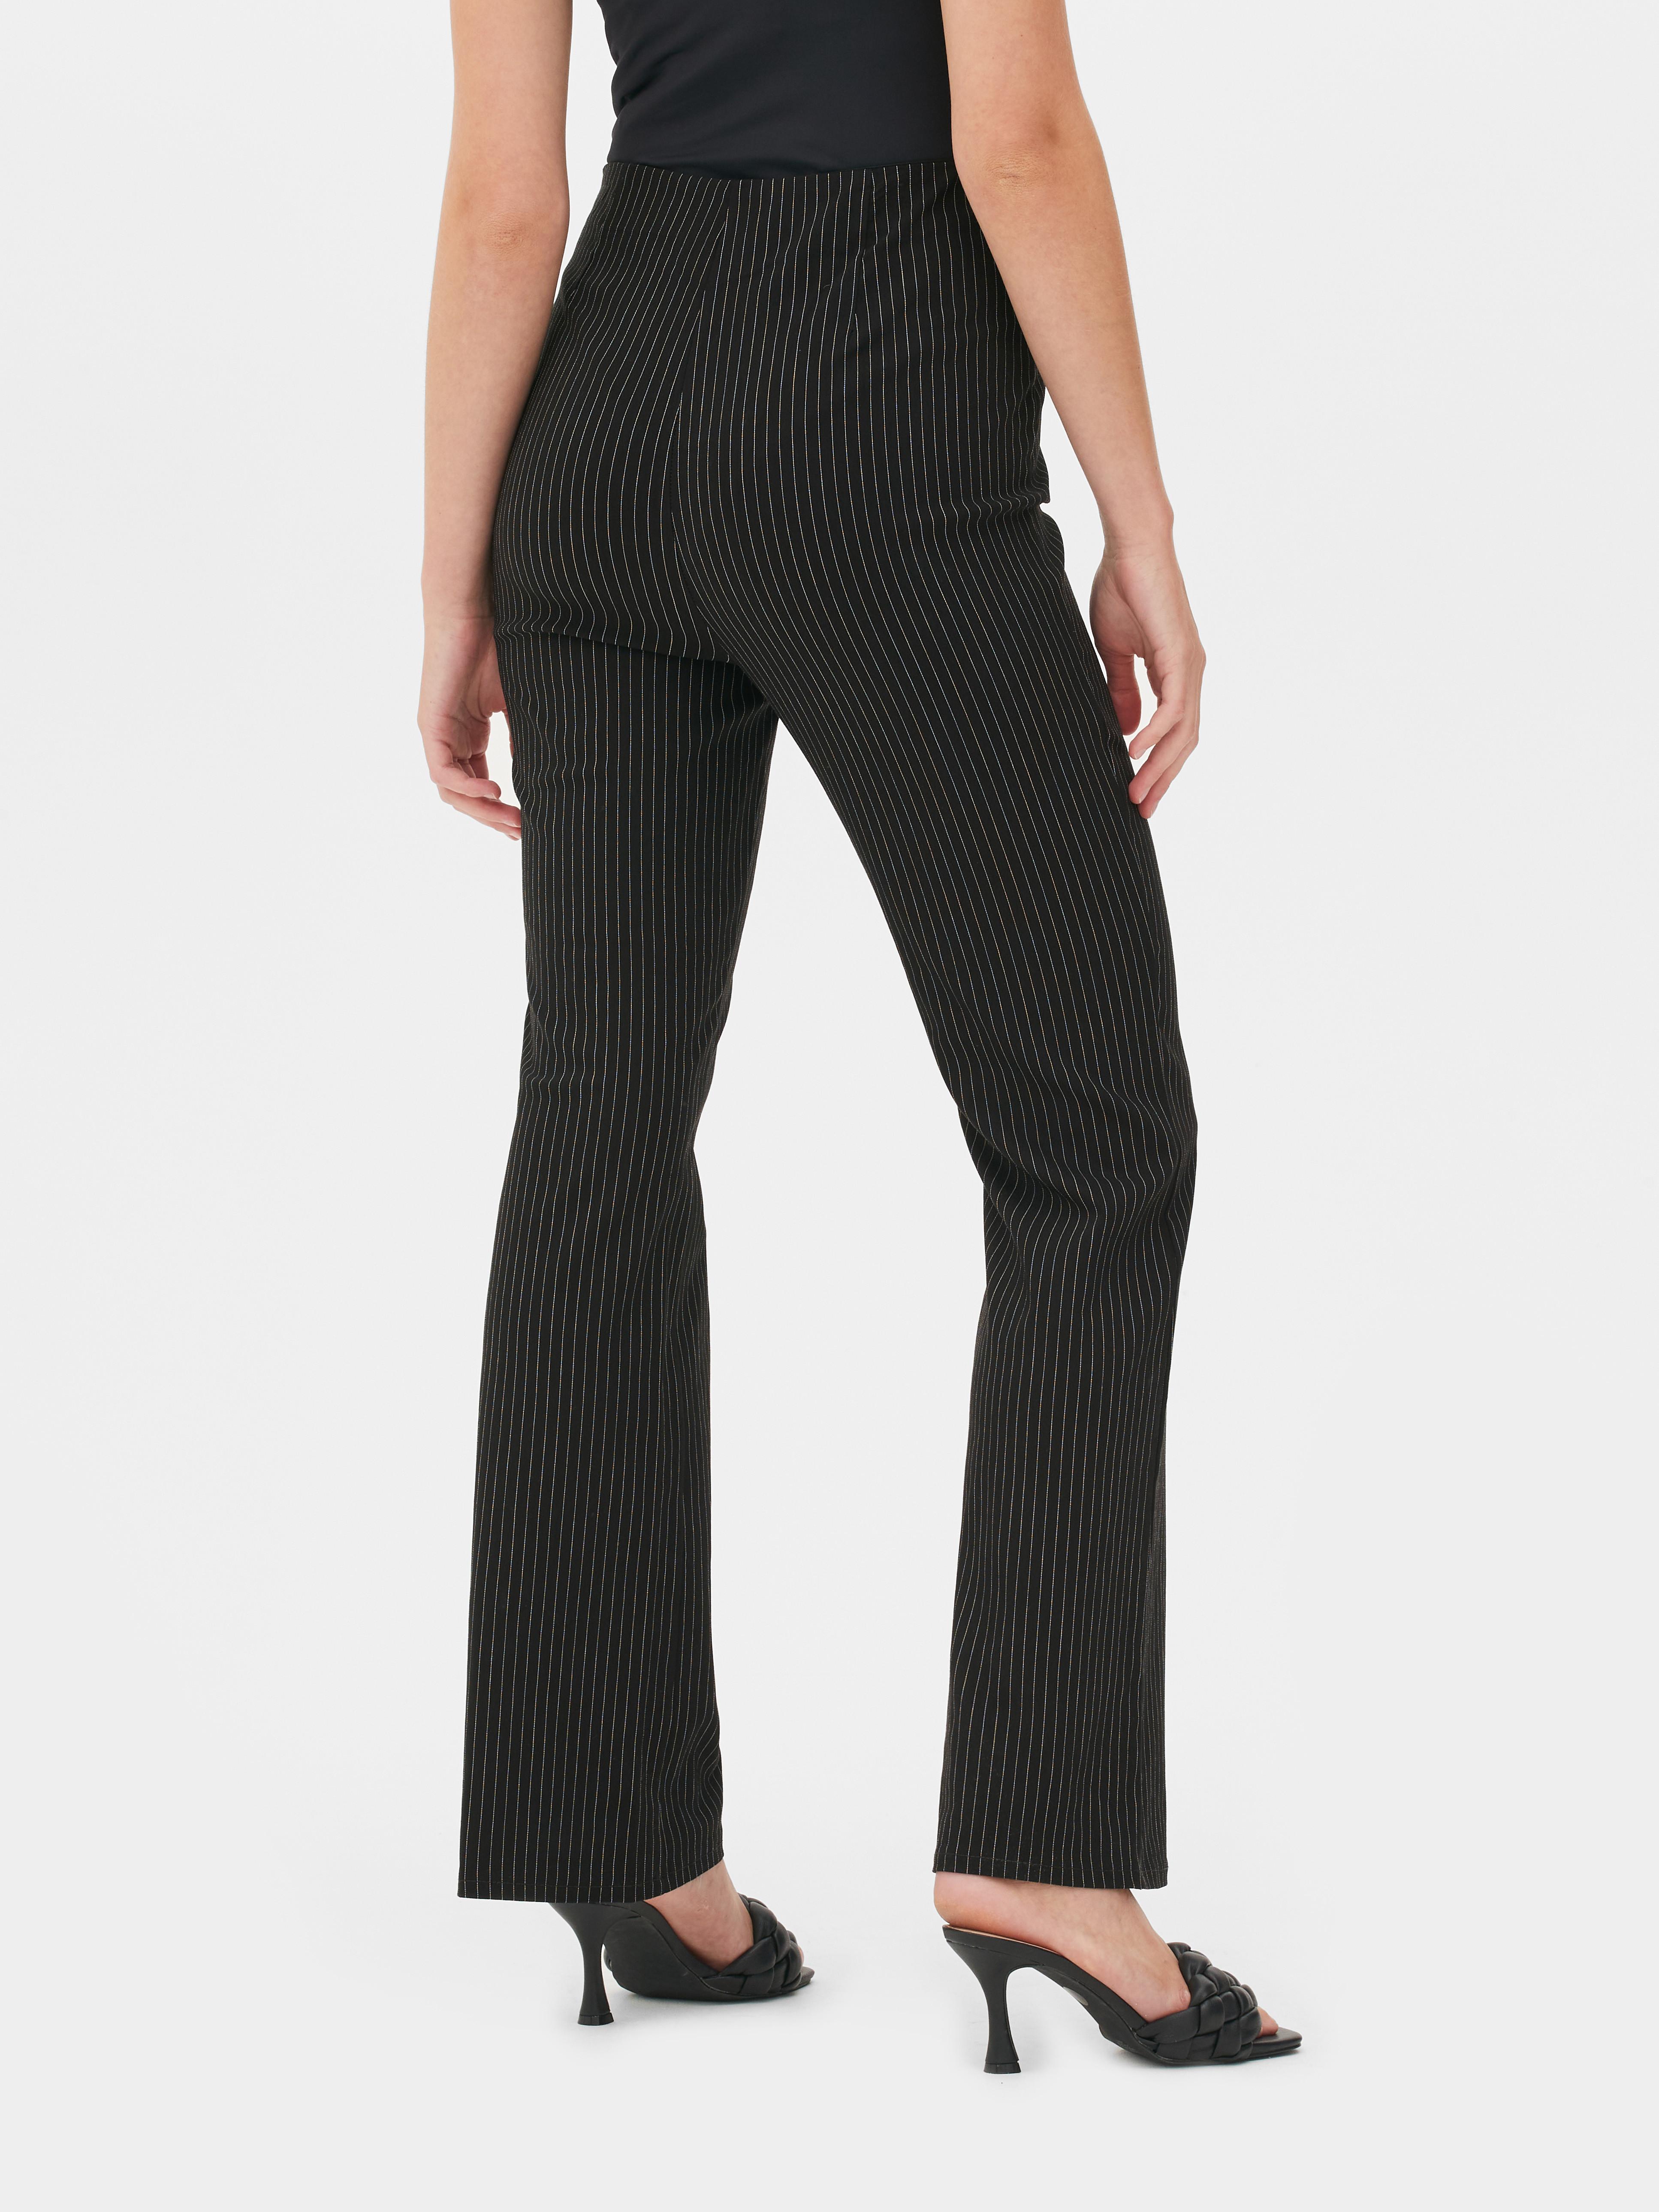 Pinstripe Corset-Style Flared Trousers